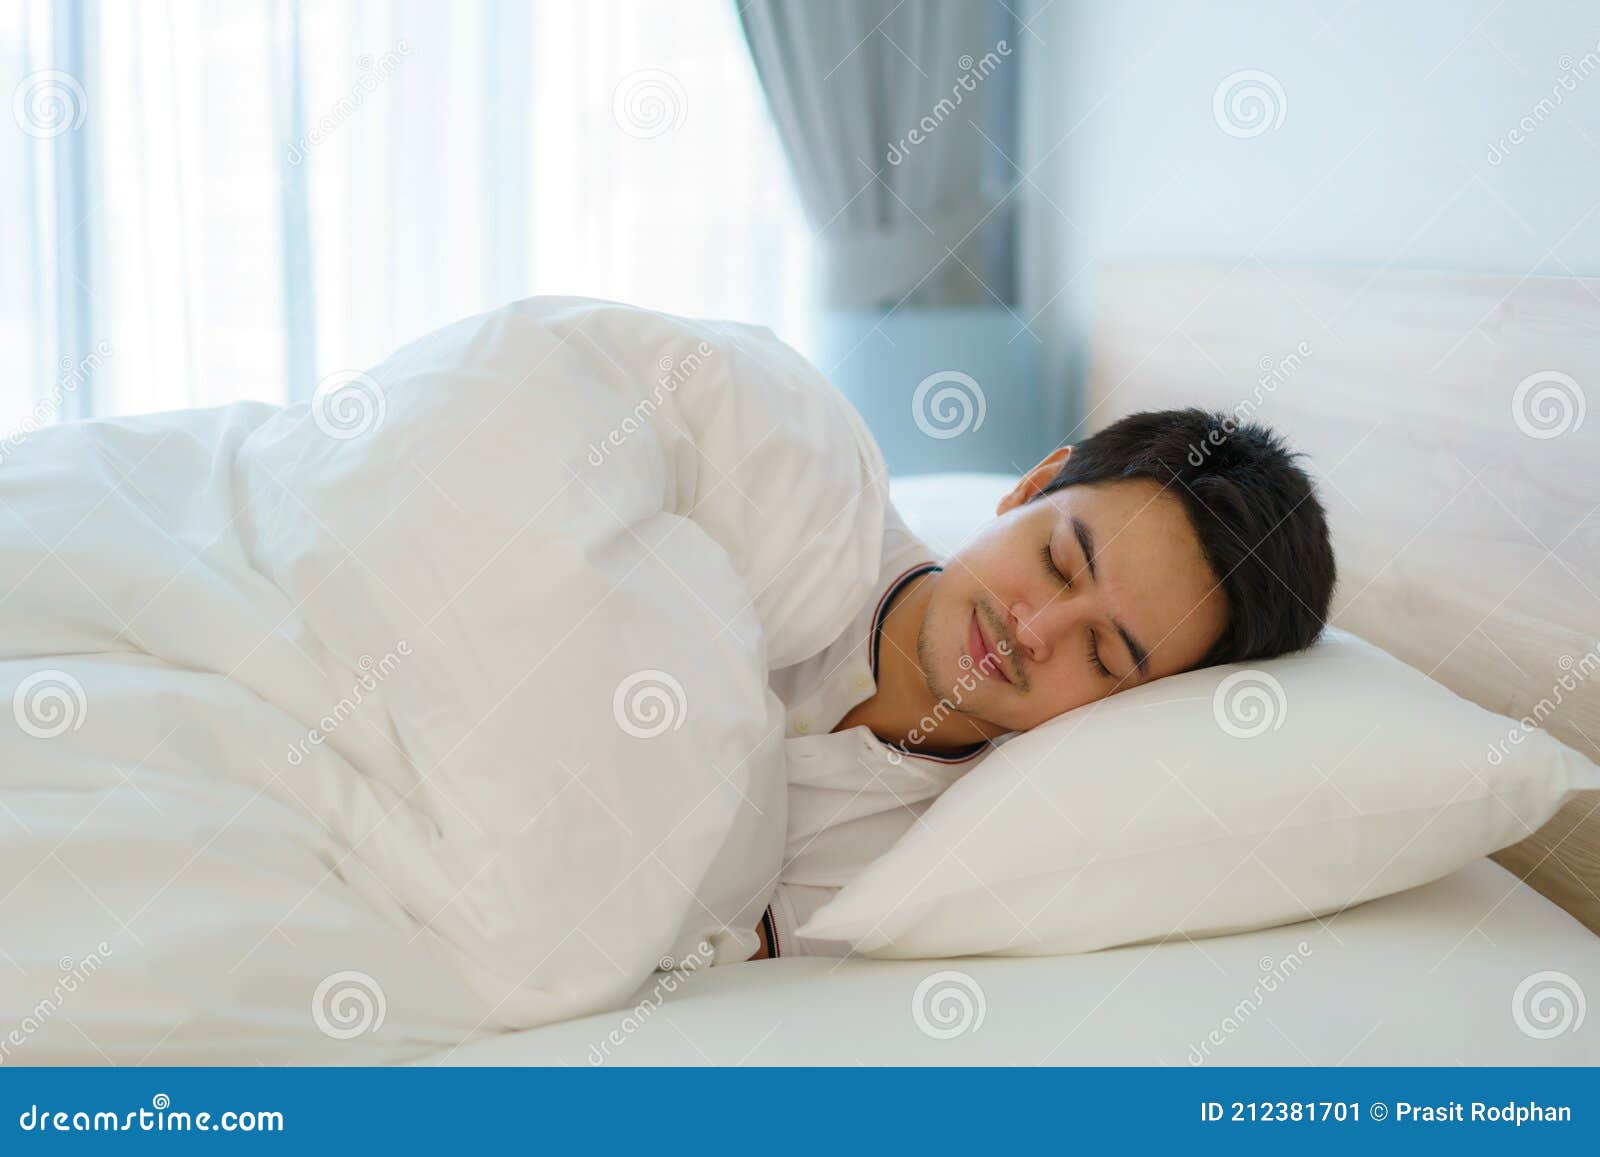 asian man are sleeping and having good dreams in white blanket in the morning. rest after work tiring in bedroom at home